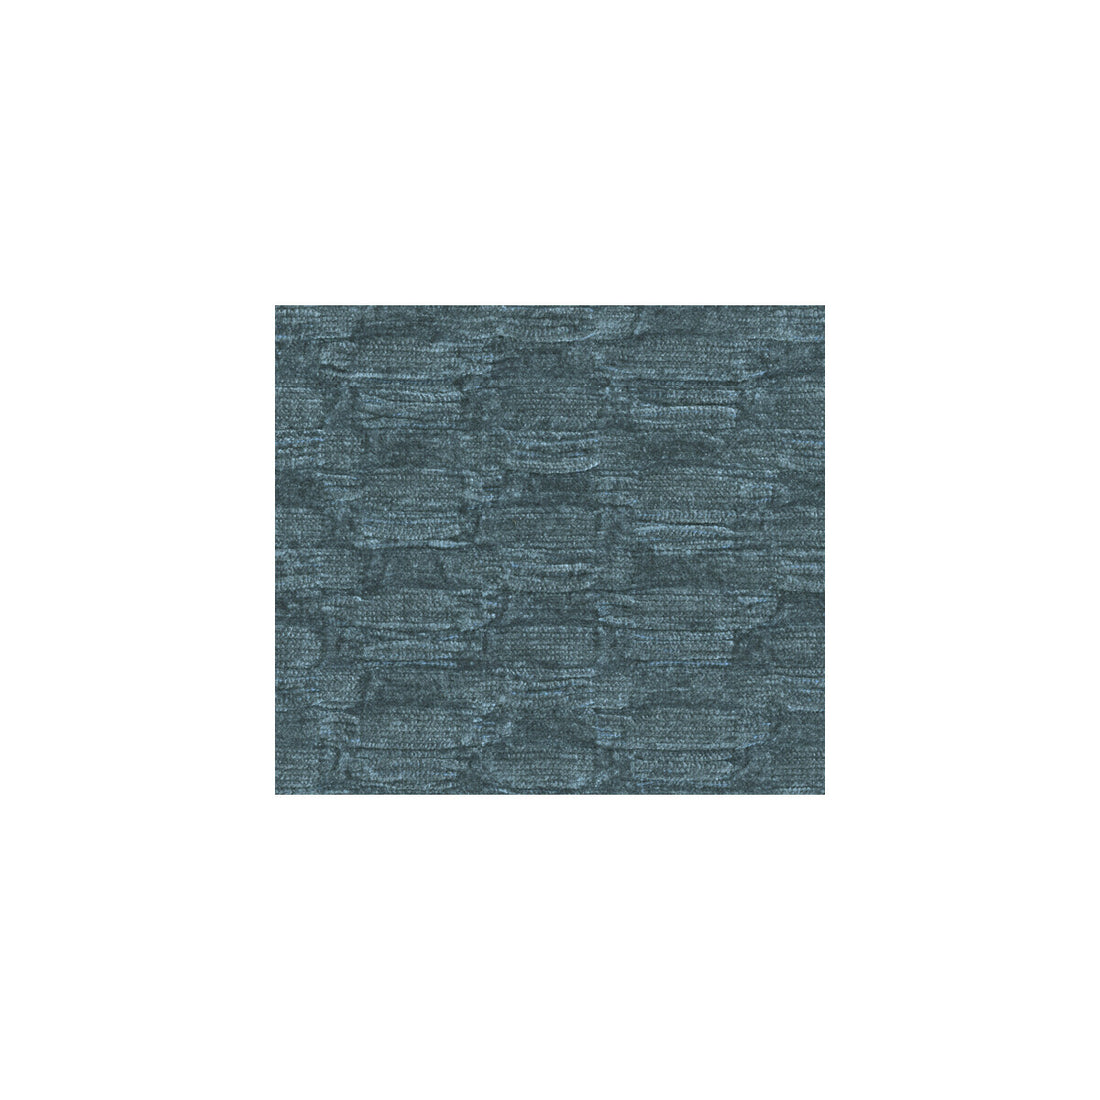 Ins And Outs fabric in indigo color - pattern 30741.5.0 - by Kravet Couture